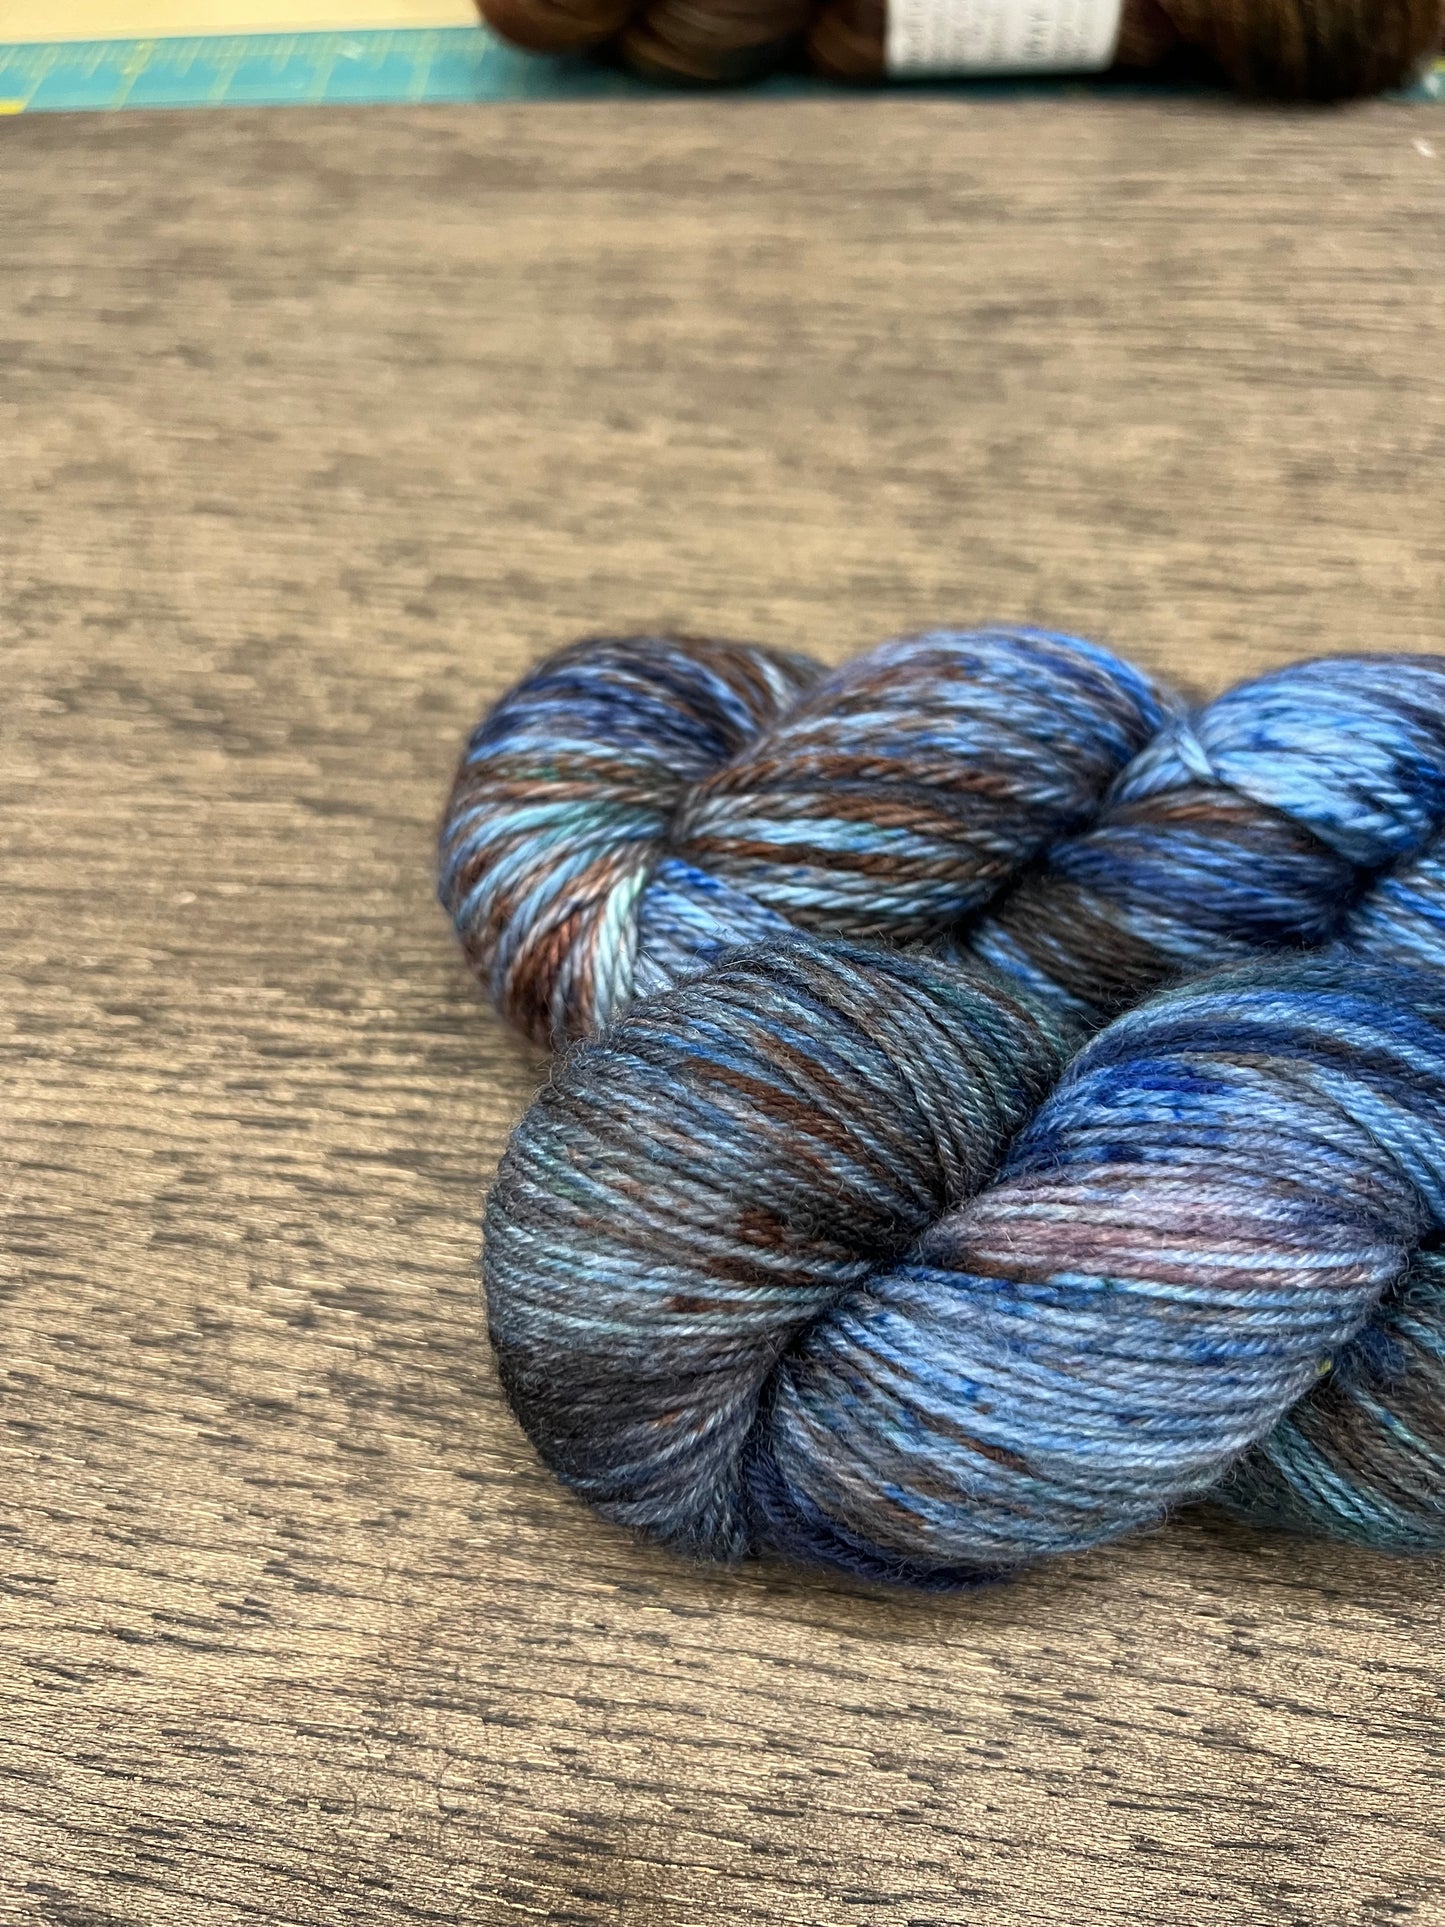 Hand Dyed Yarn Club Monthly Subscription OUTLANDER inspired Knitting Crochet Gift APRIL Mystery Skein for Crafters